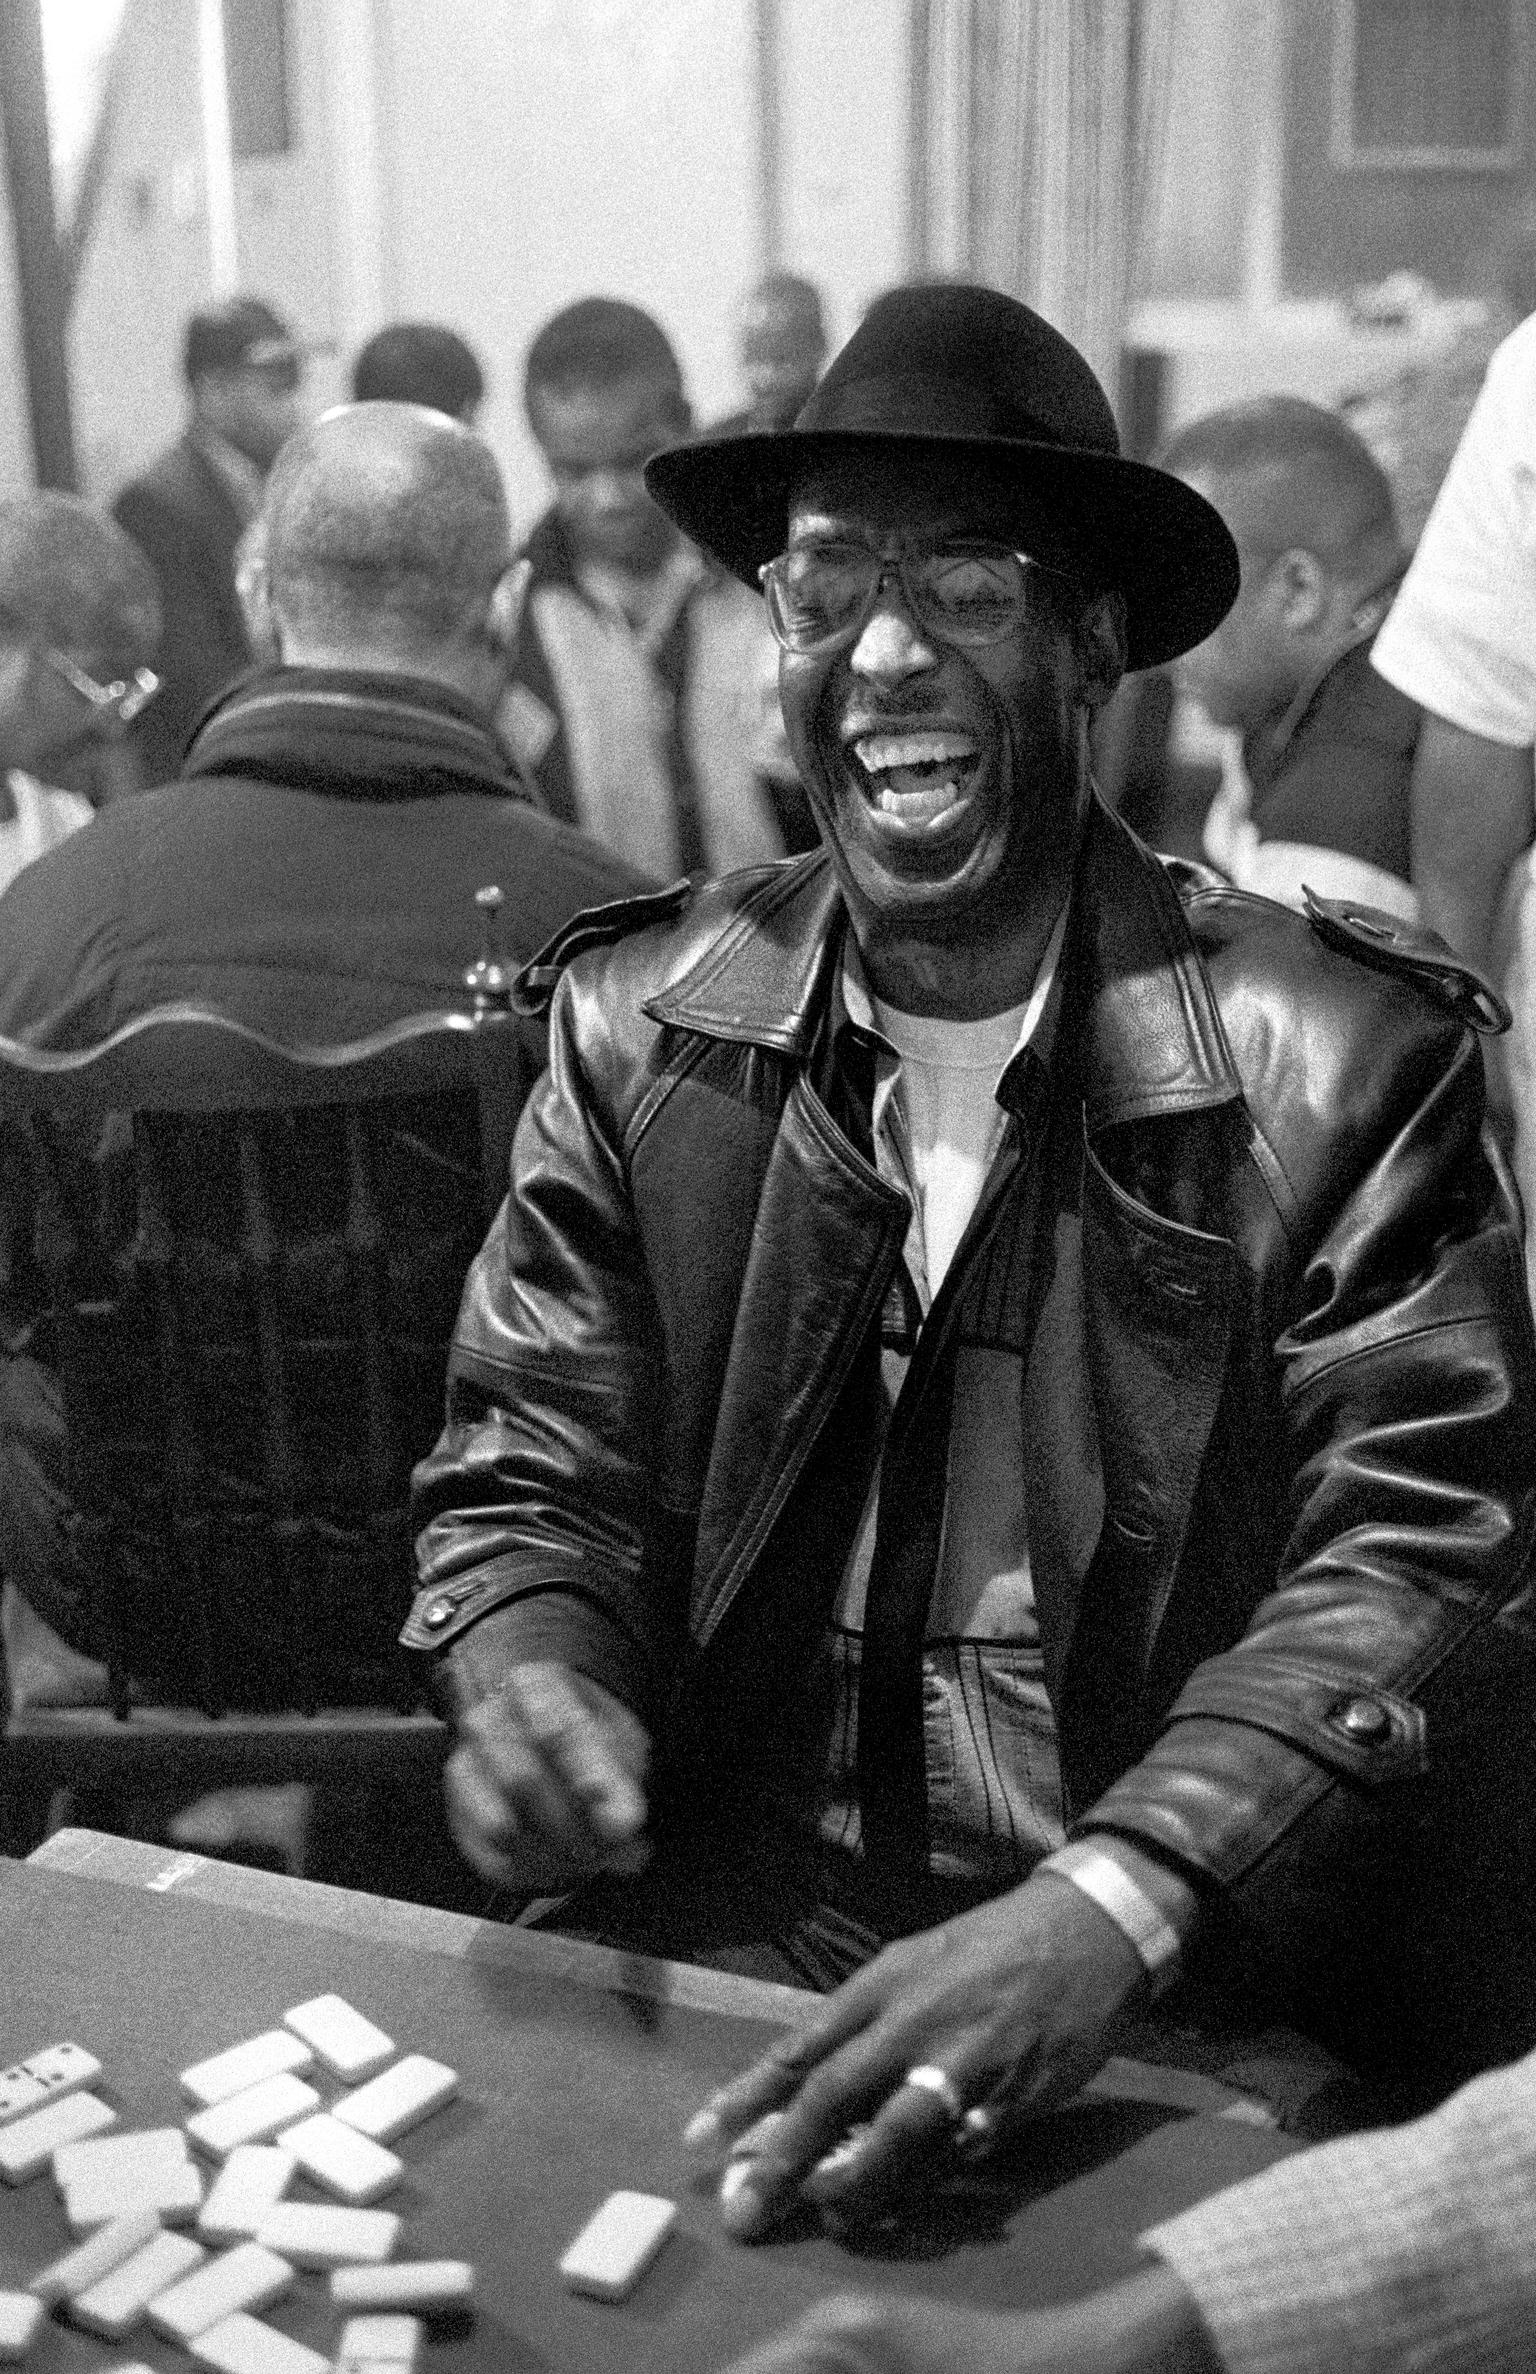 Enjoying a winning hand. A player laughing at a domino match between Cardiff and London held above Bab's Bistro